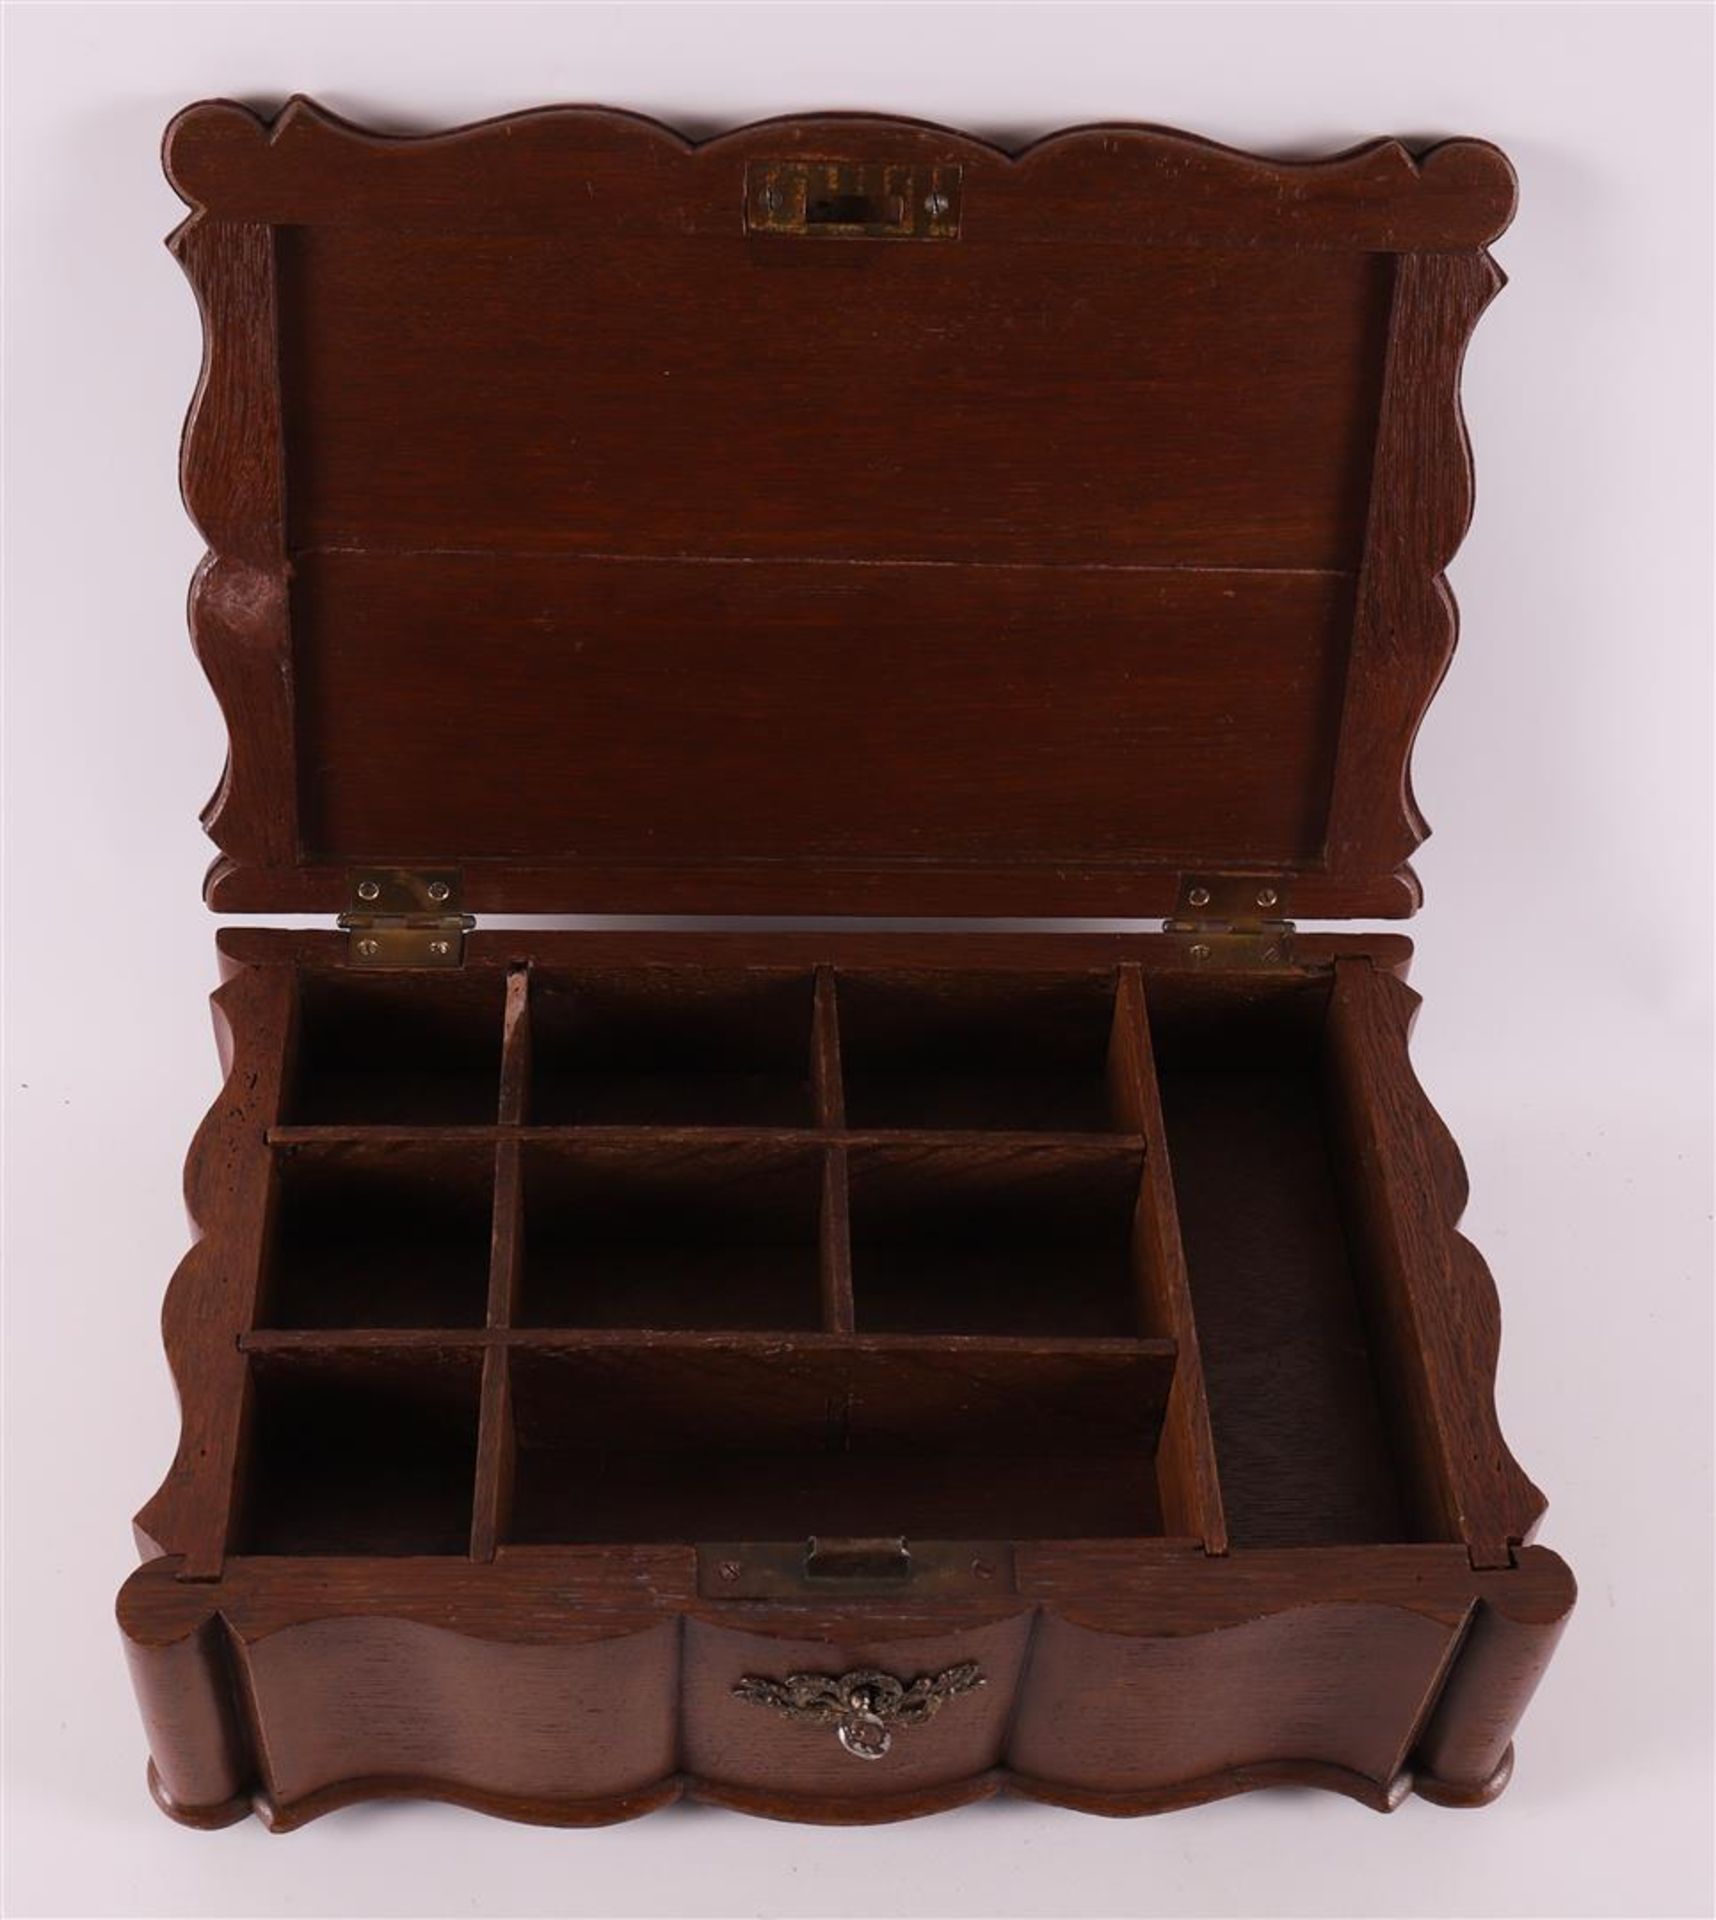 An organ-curved oak document box, 18th century. - Image 2 of 5